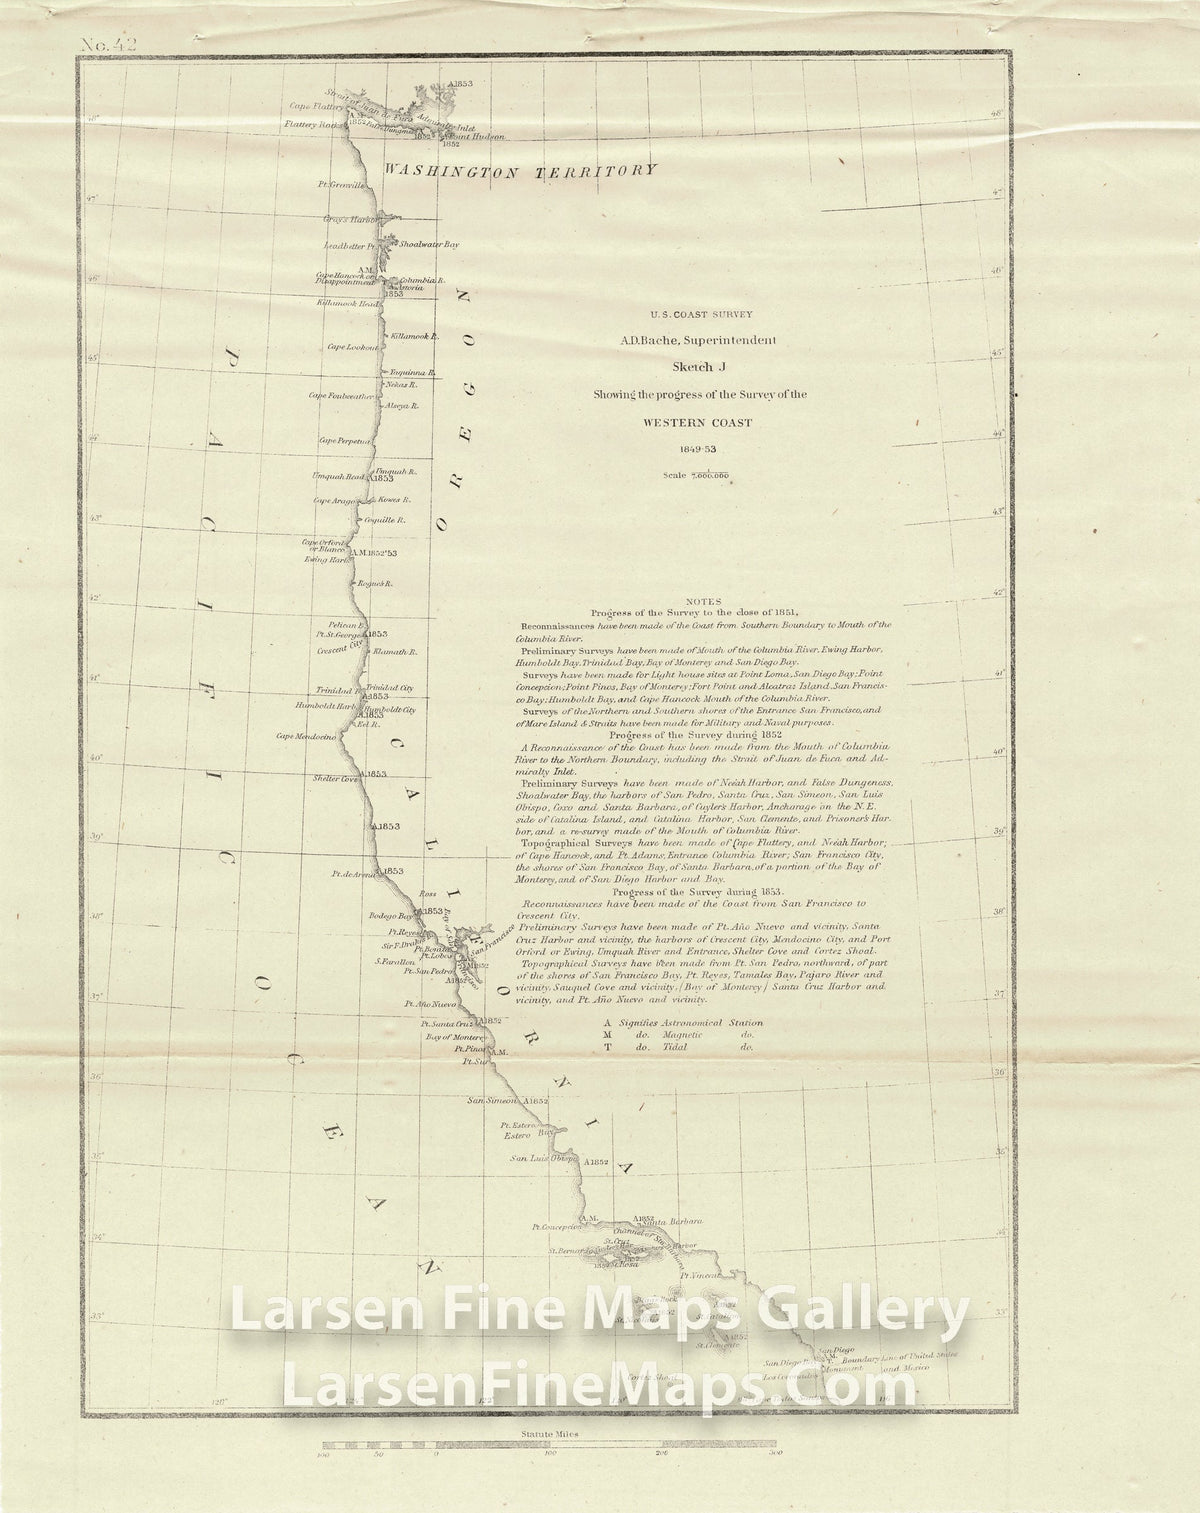 Sketch J Showing the Progress of the Survey of the Western Coast 1849-53